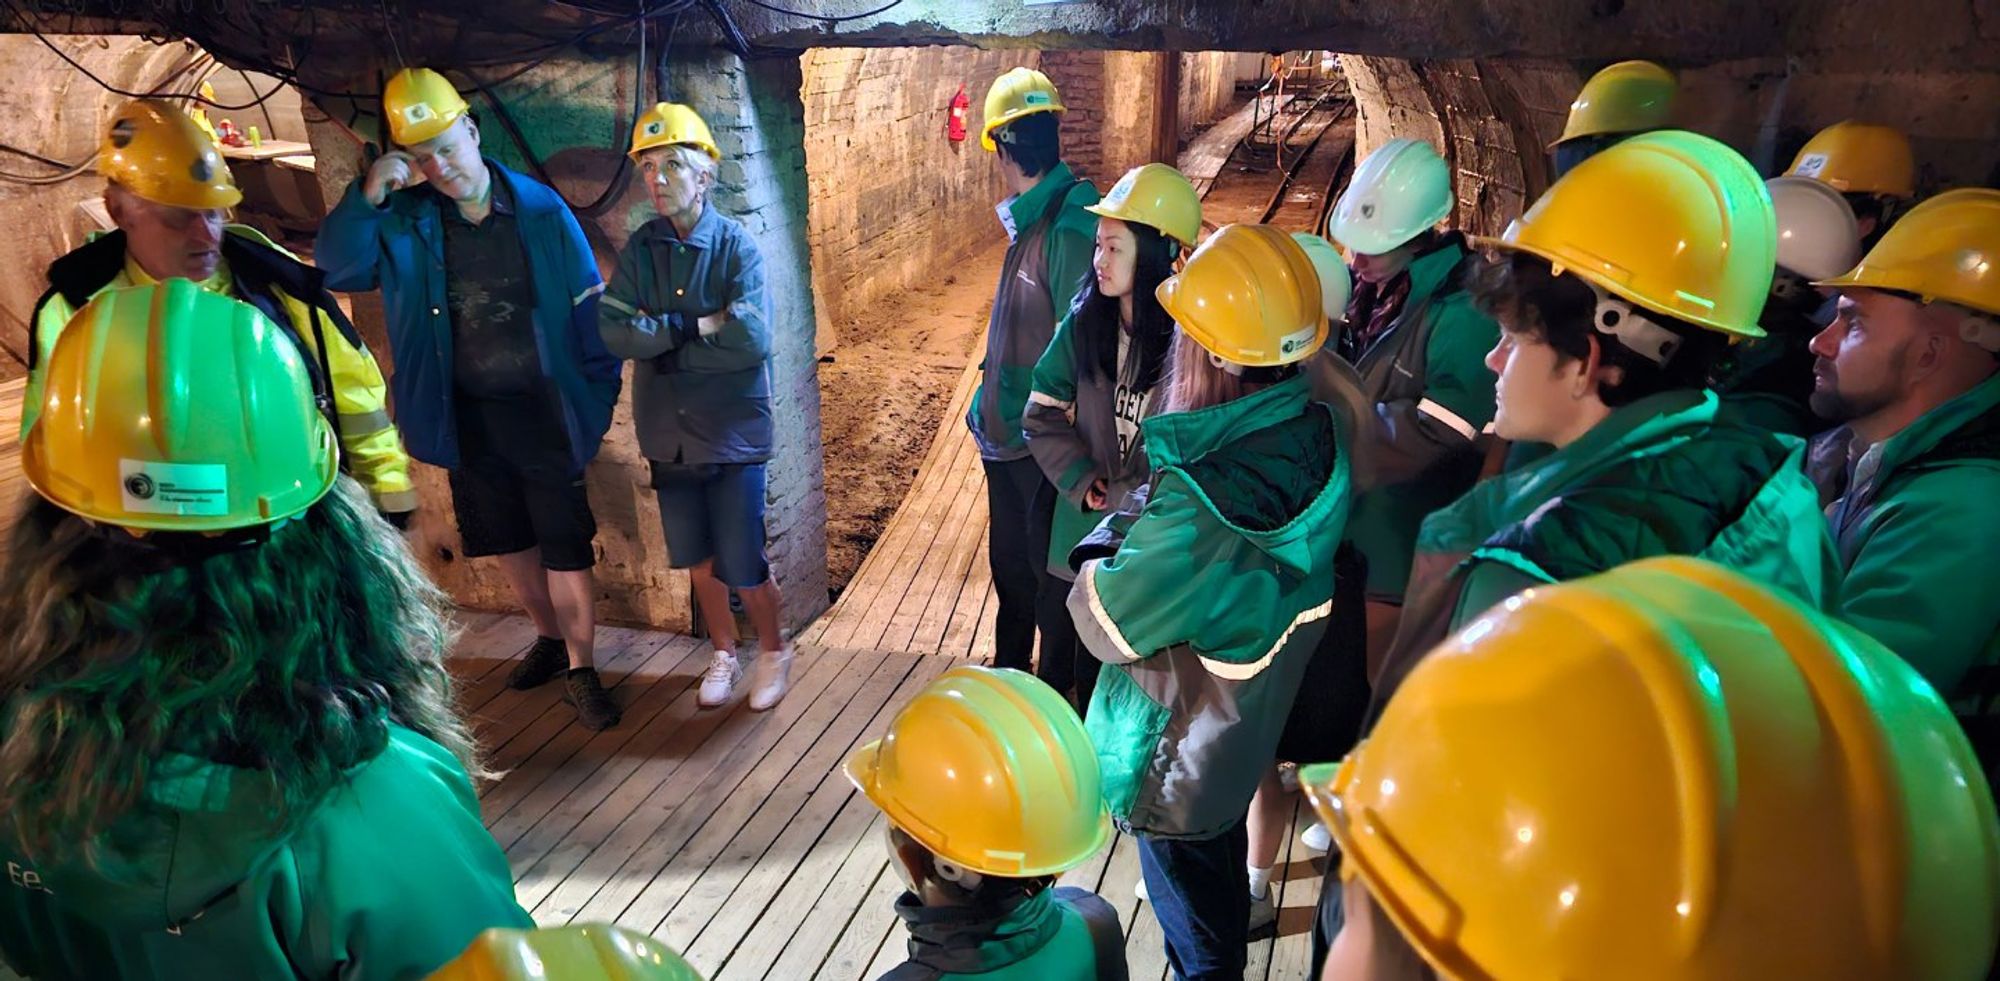 With Dartmouth students in an oil shale mine.